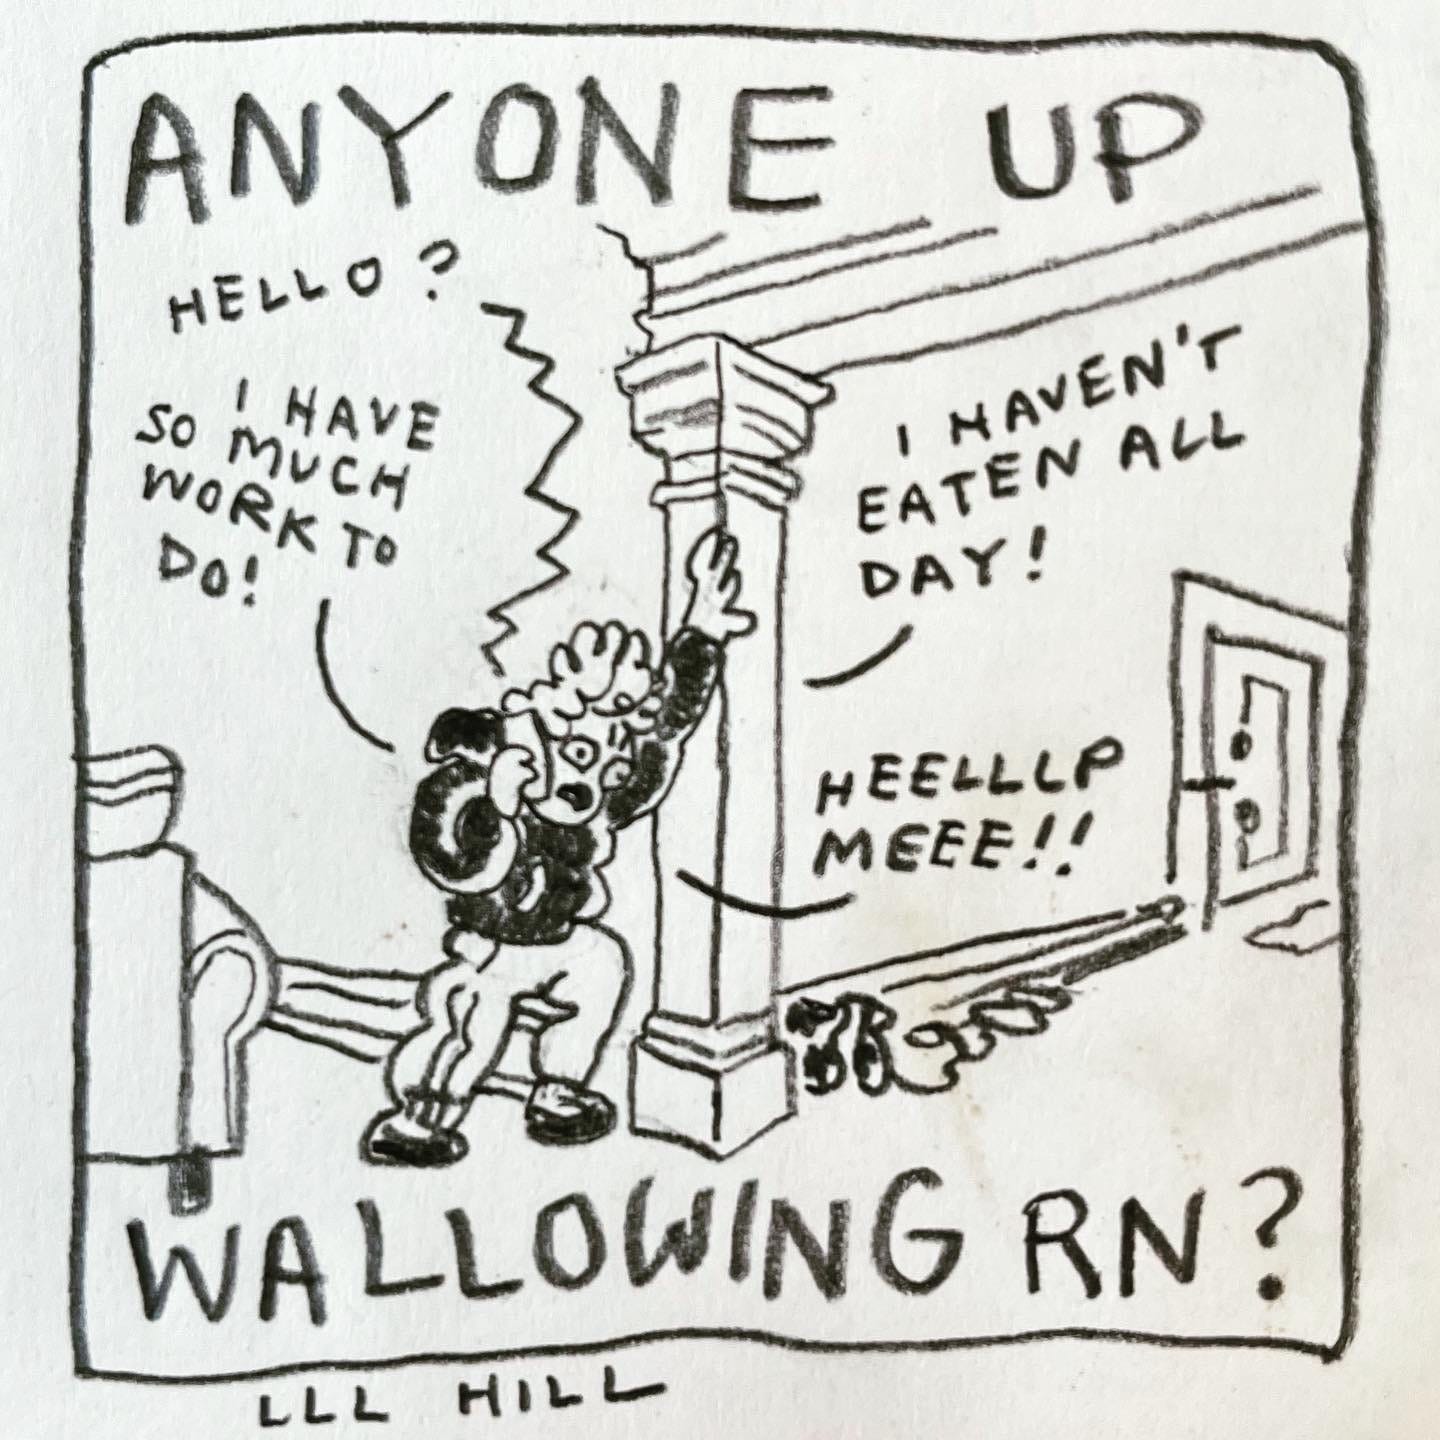 Panel 6: anyone up wallowing rn? Image: The corner of a couch in the foreground, and the full corner pillar crowned with molding in the middle ground, two-point perspective showing another doorway in the background and the baseboards receding from the viewer. Lark is on the phone, wearing sweatpants and a hoodie, leaning with one arm raised against the pillar. A voice on the phone says "hello?" and Lark, eyes bulging, shouts back, "I have so much work to do! I haven't eaten all day! Heelllp meee!"